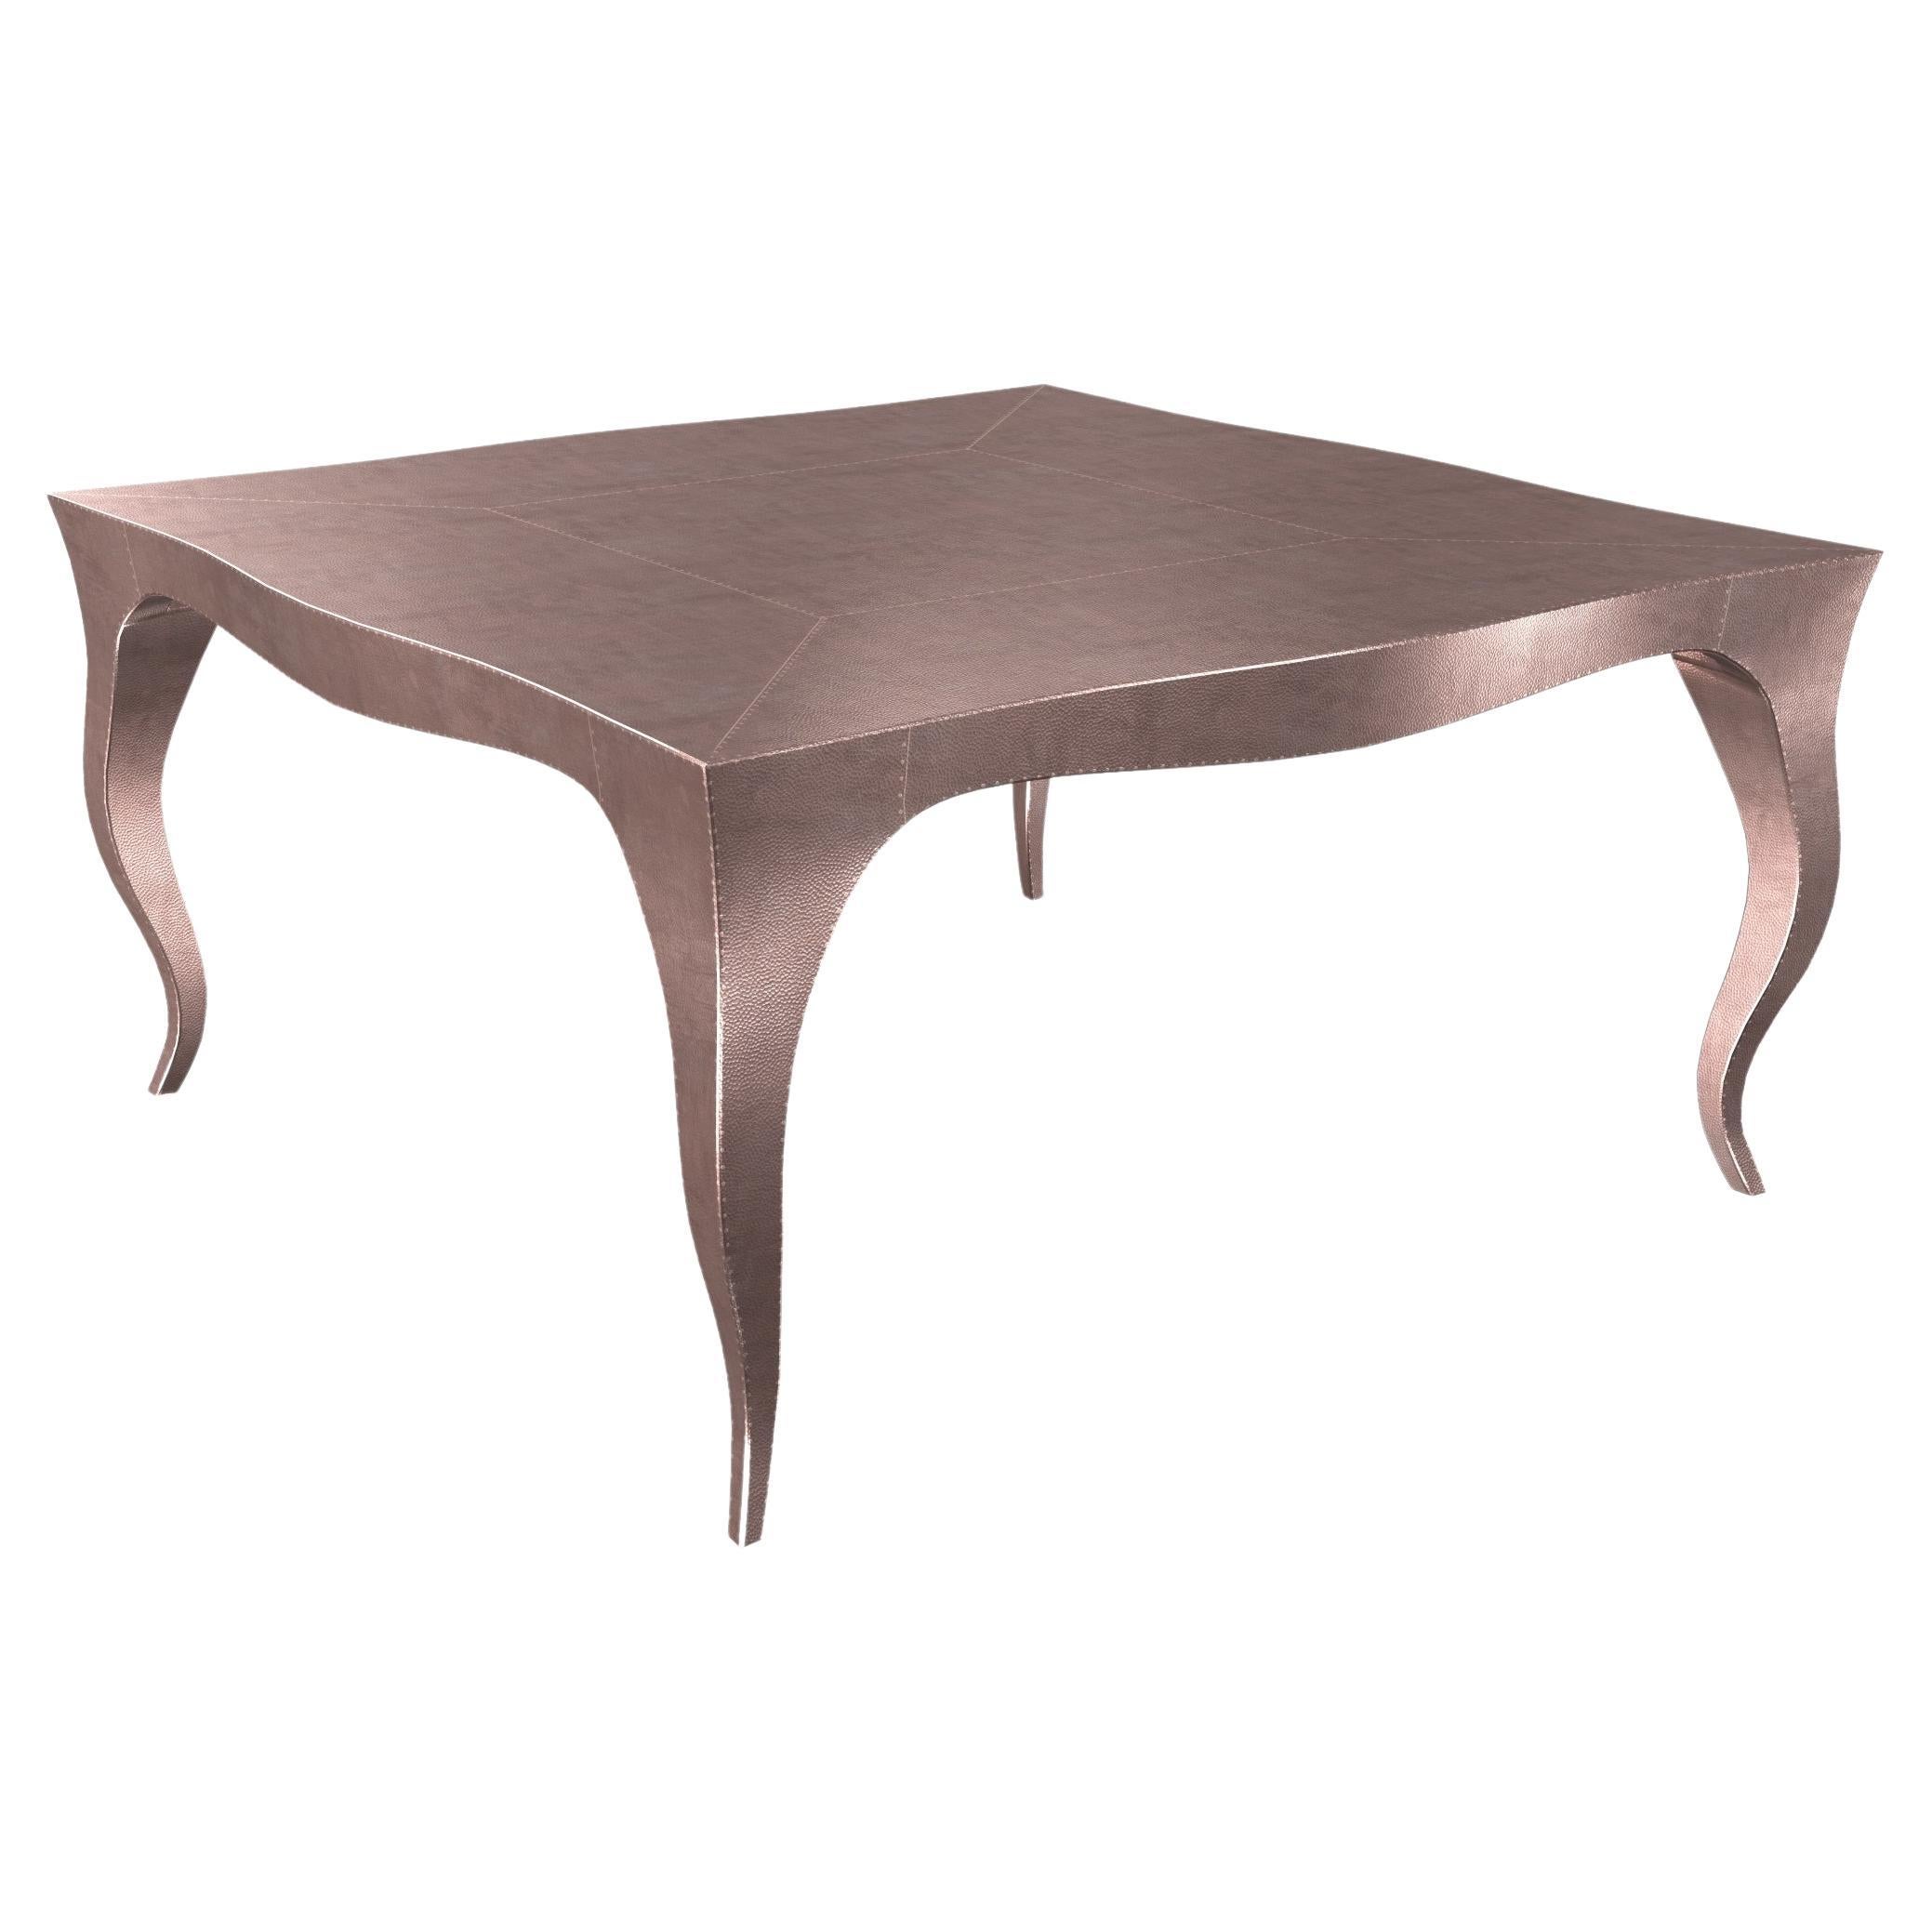 Louise Art Deco Coffee and Cocktail Tables Mid. Hammered Copper 18.5x18.5x10inch For Sale